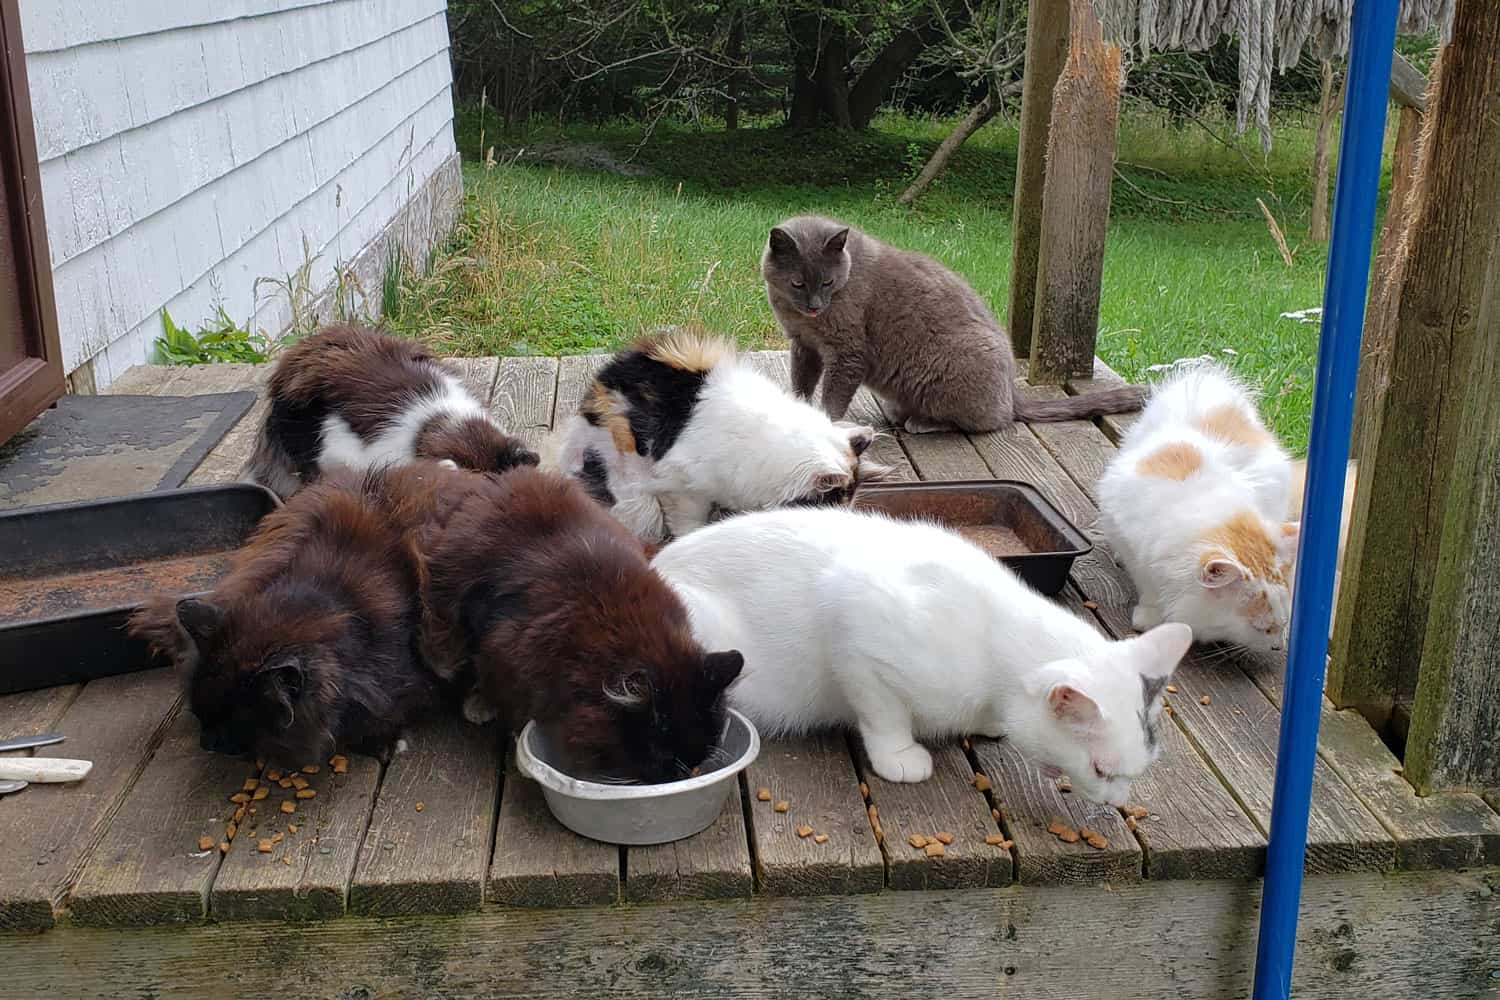 Feral cats gathering on the wooden stoop at a personal residence. The cats are white, gray, spotted, and of a variety of mixed breeds. They're eating solid food from pet food bowls.
